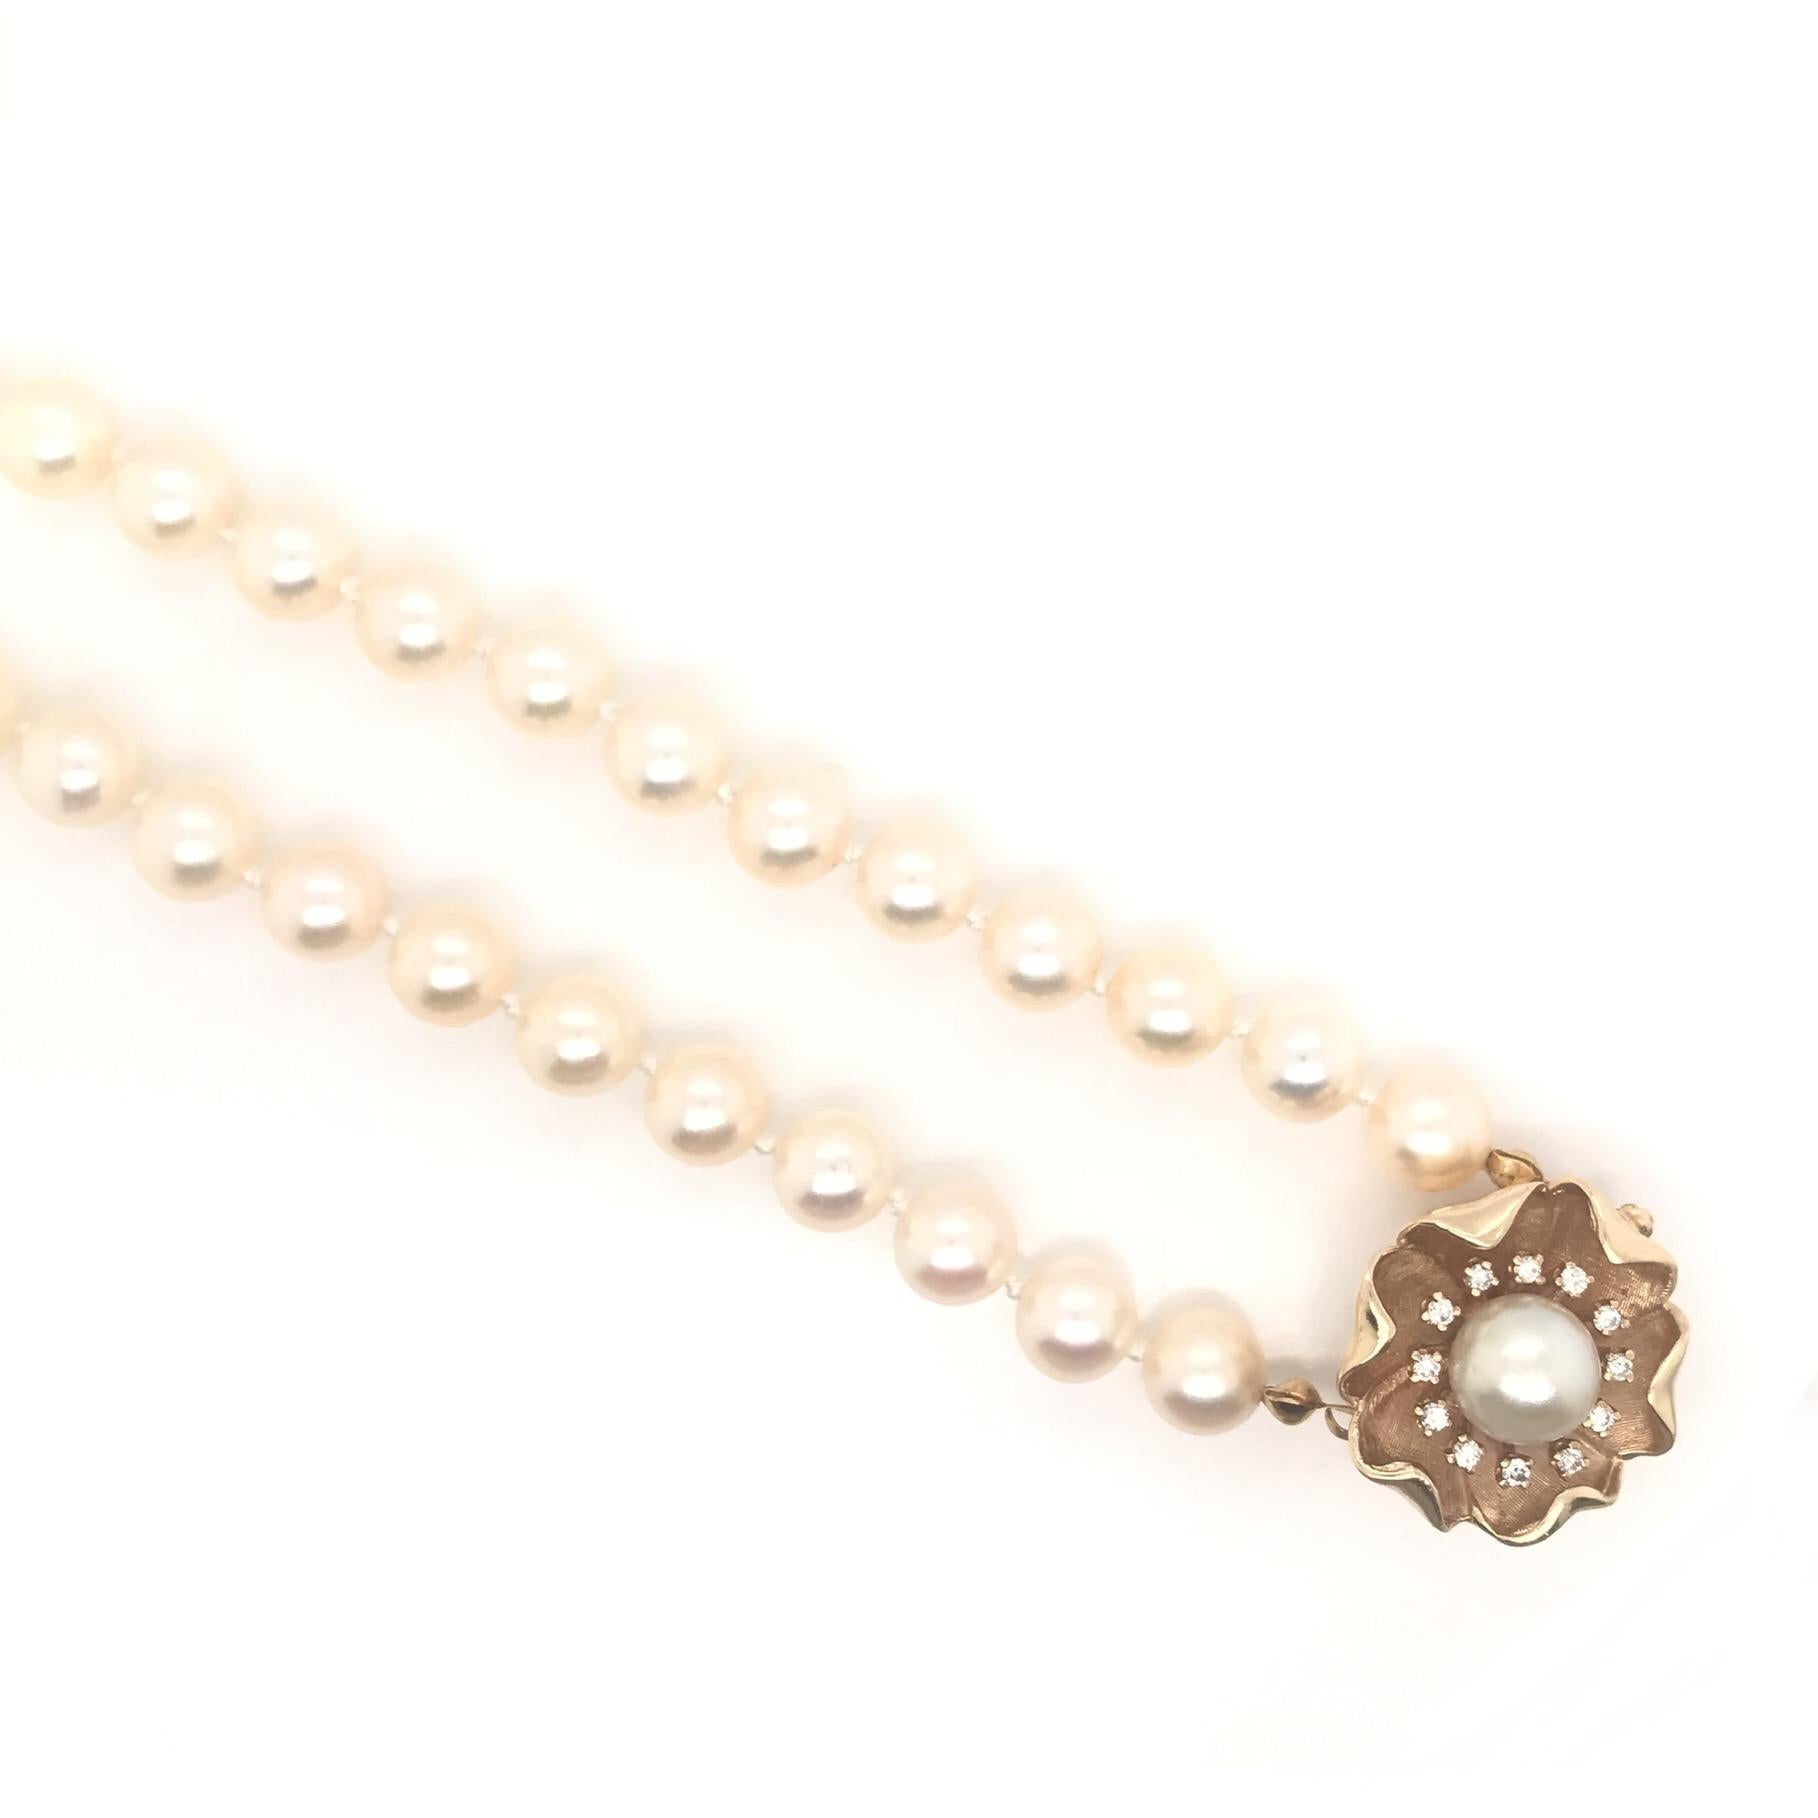 This vintage pearl necklace was crafted sometime during the Mid Century design period (1940-1960). The Mid Century or “Retro” design period was the golden age of cultured pearls. There might not be any other gem so absolutely iconic to the 1950’s